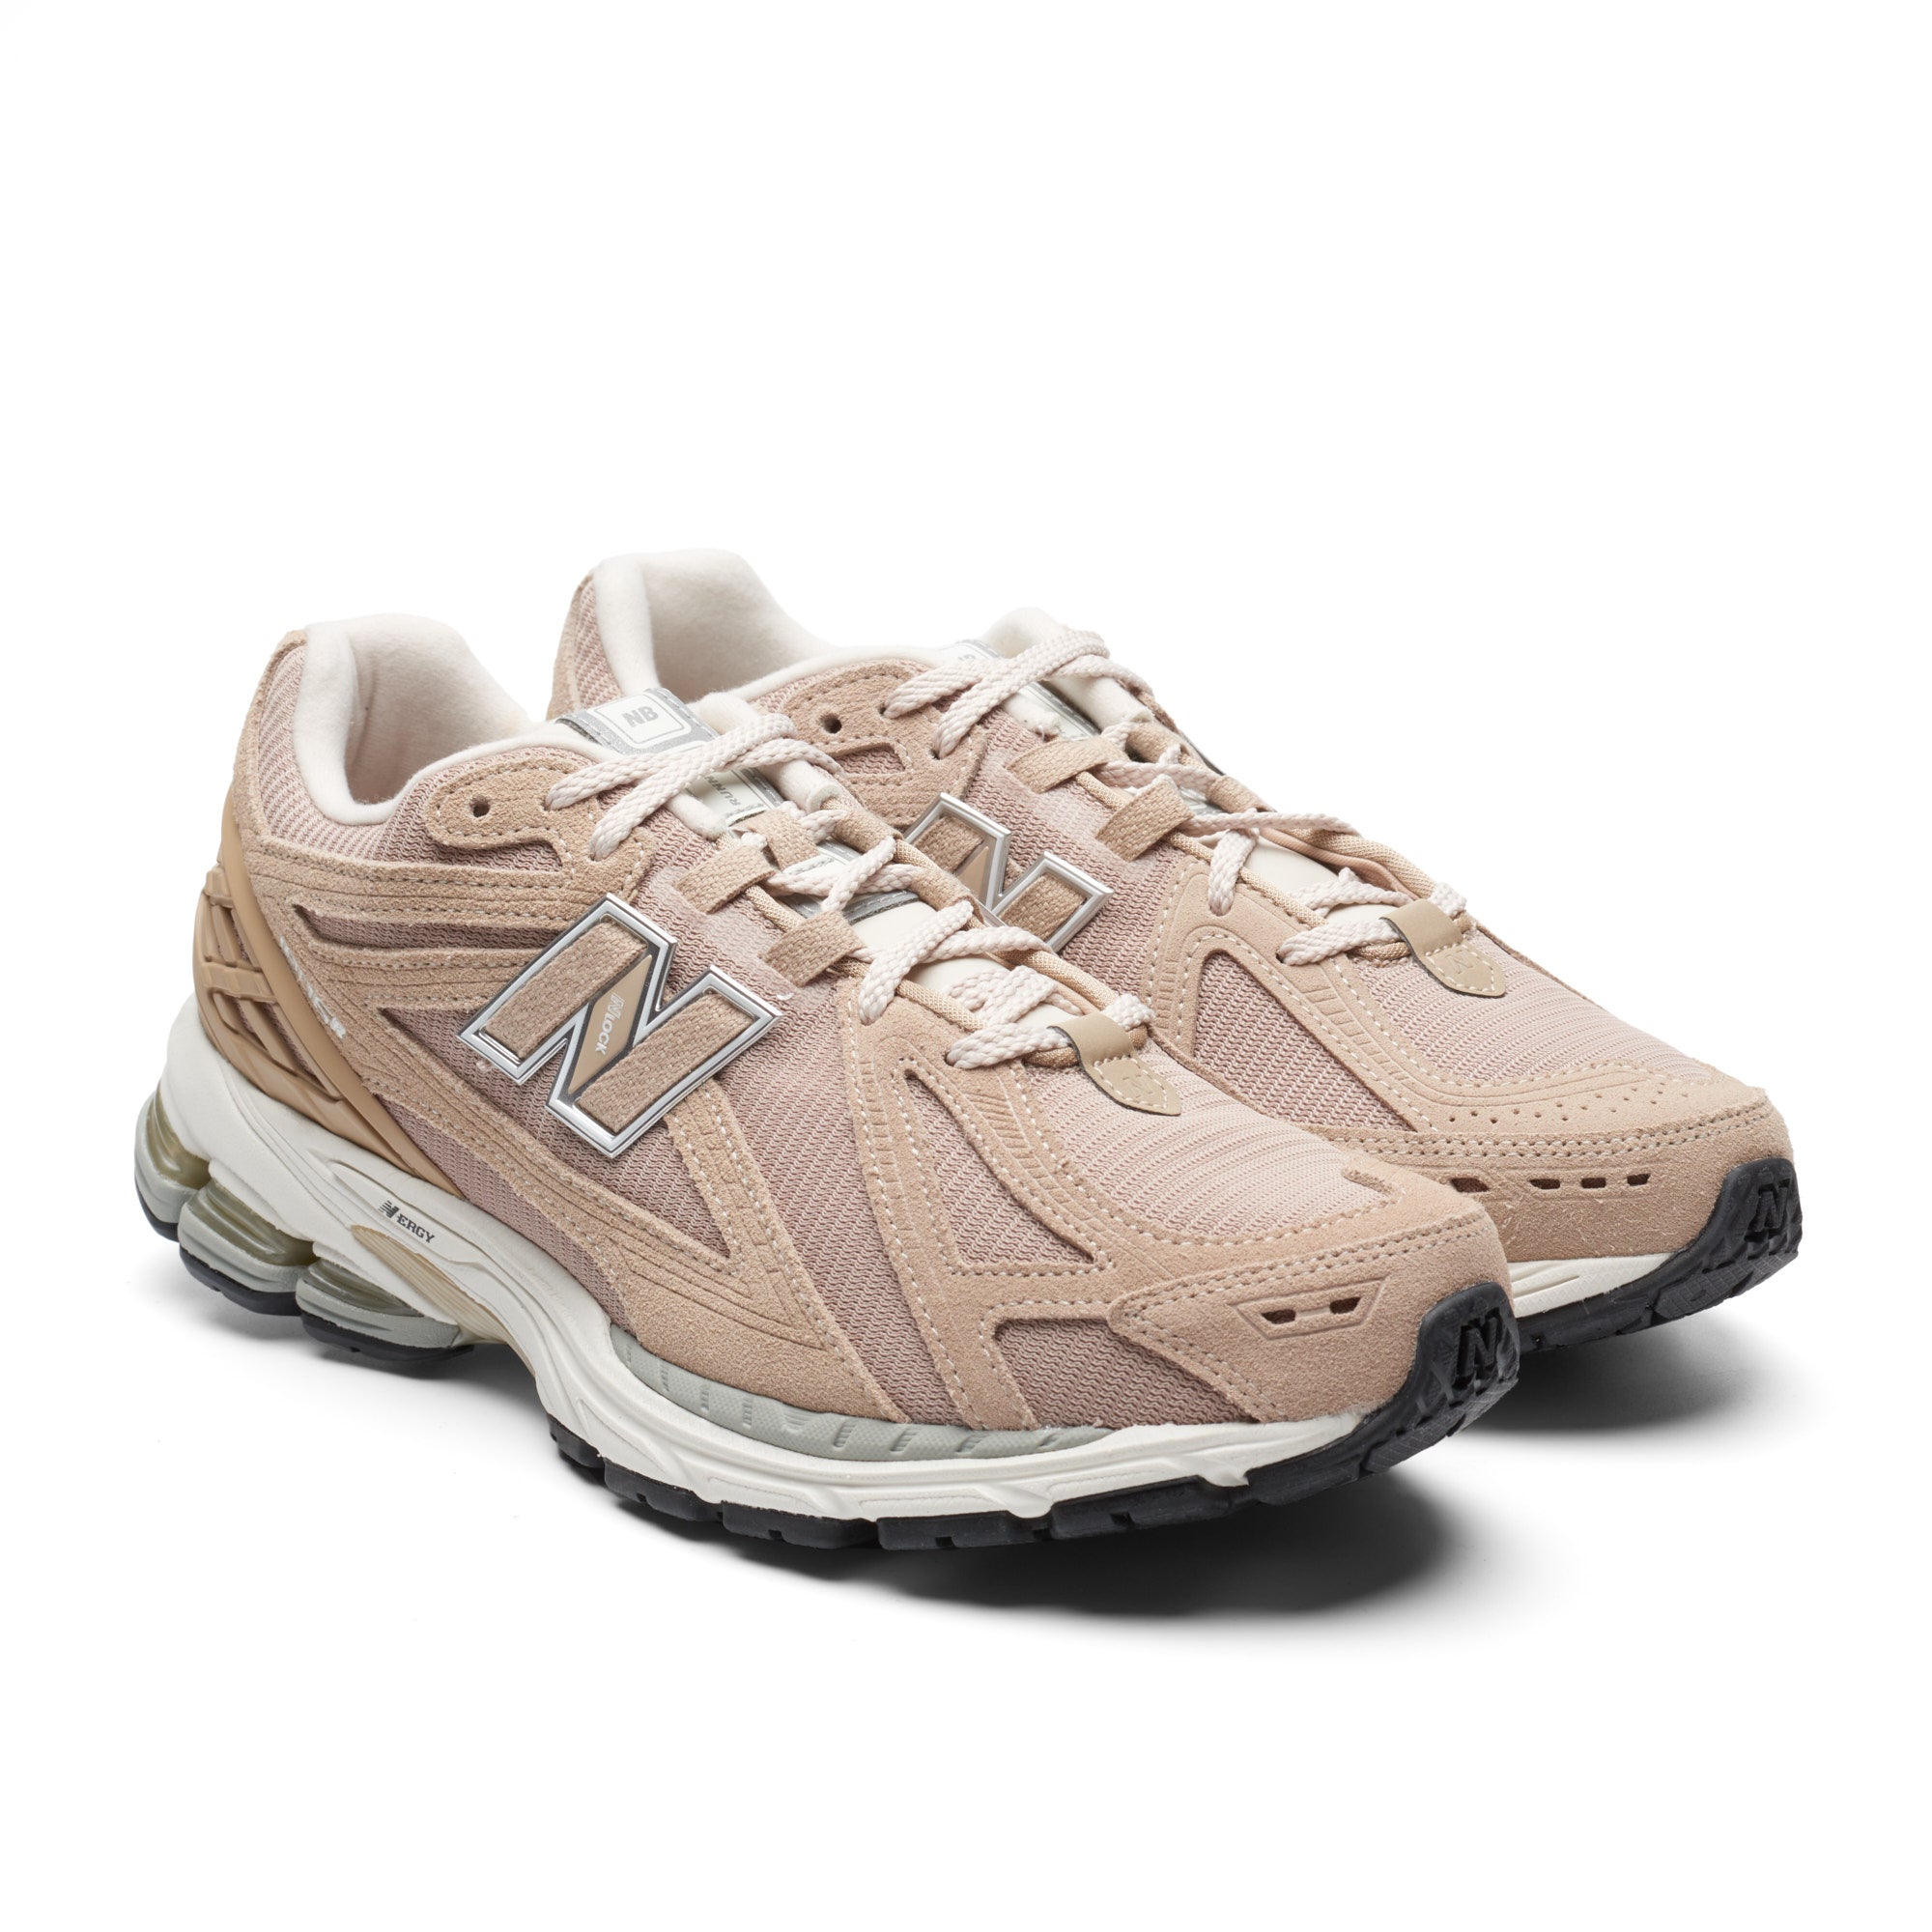 NEW BALANCE Beige Running Sneakers Shoes UK 9.5 US 10 NEW –